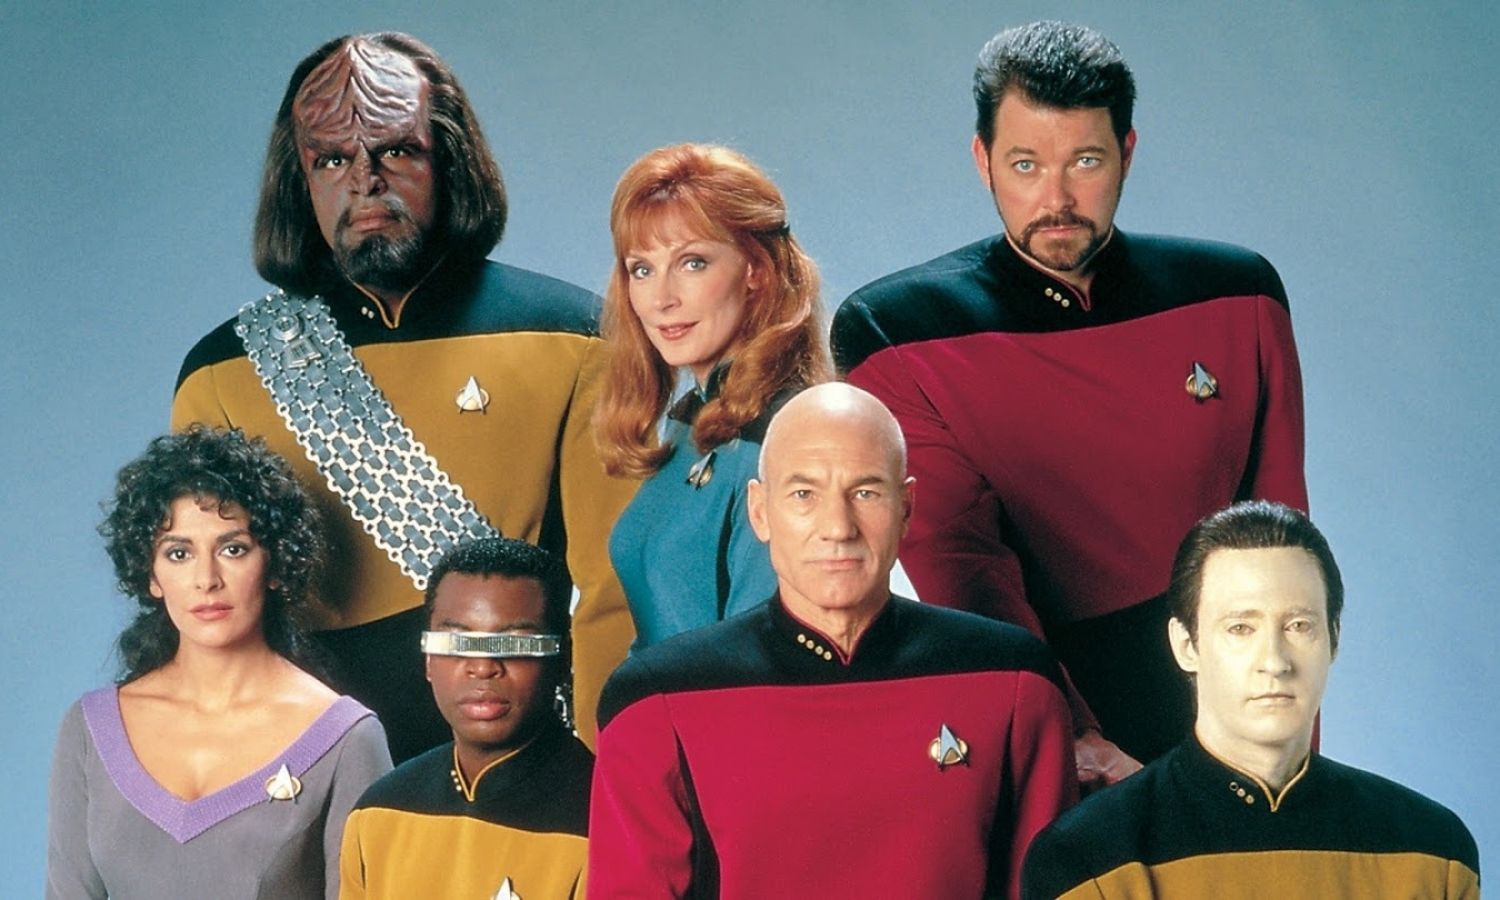 OTD in 1987: The science-fiction TV series "Star Trek: The Next Generation" first aired on CBS.